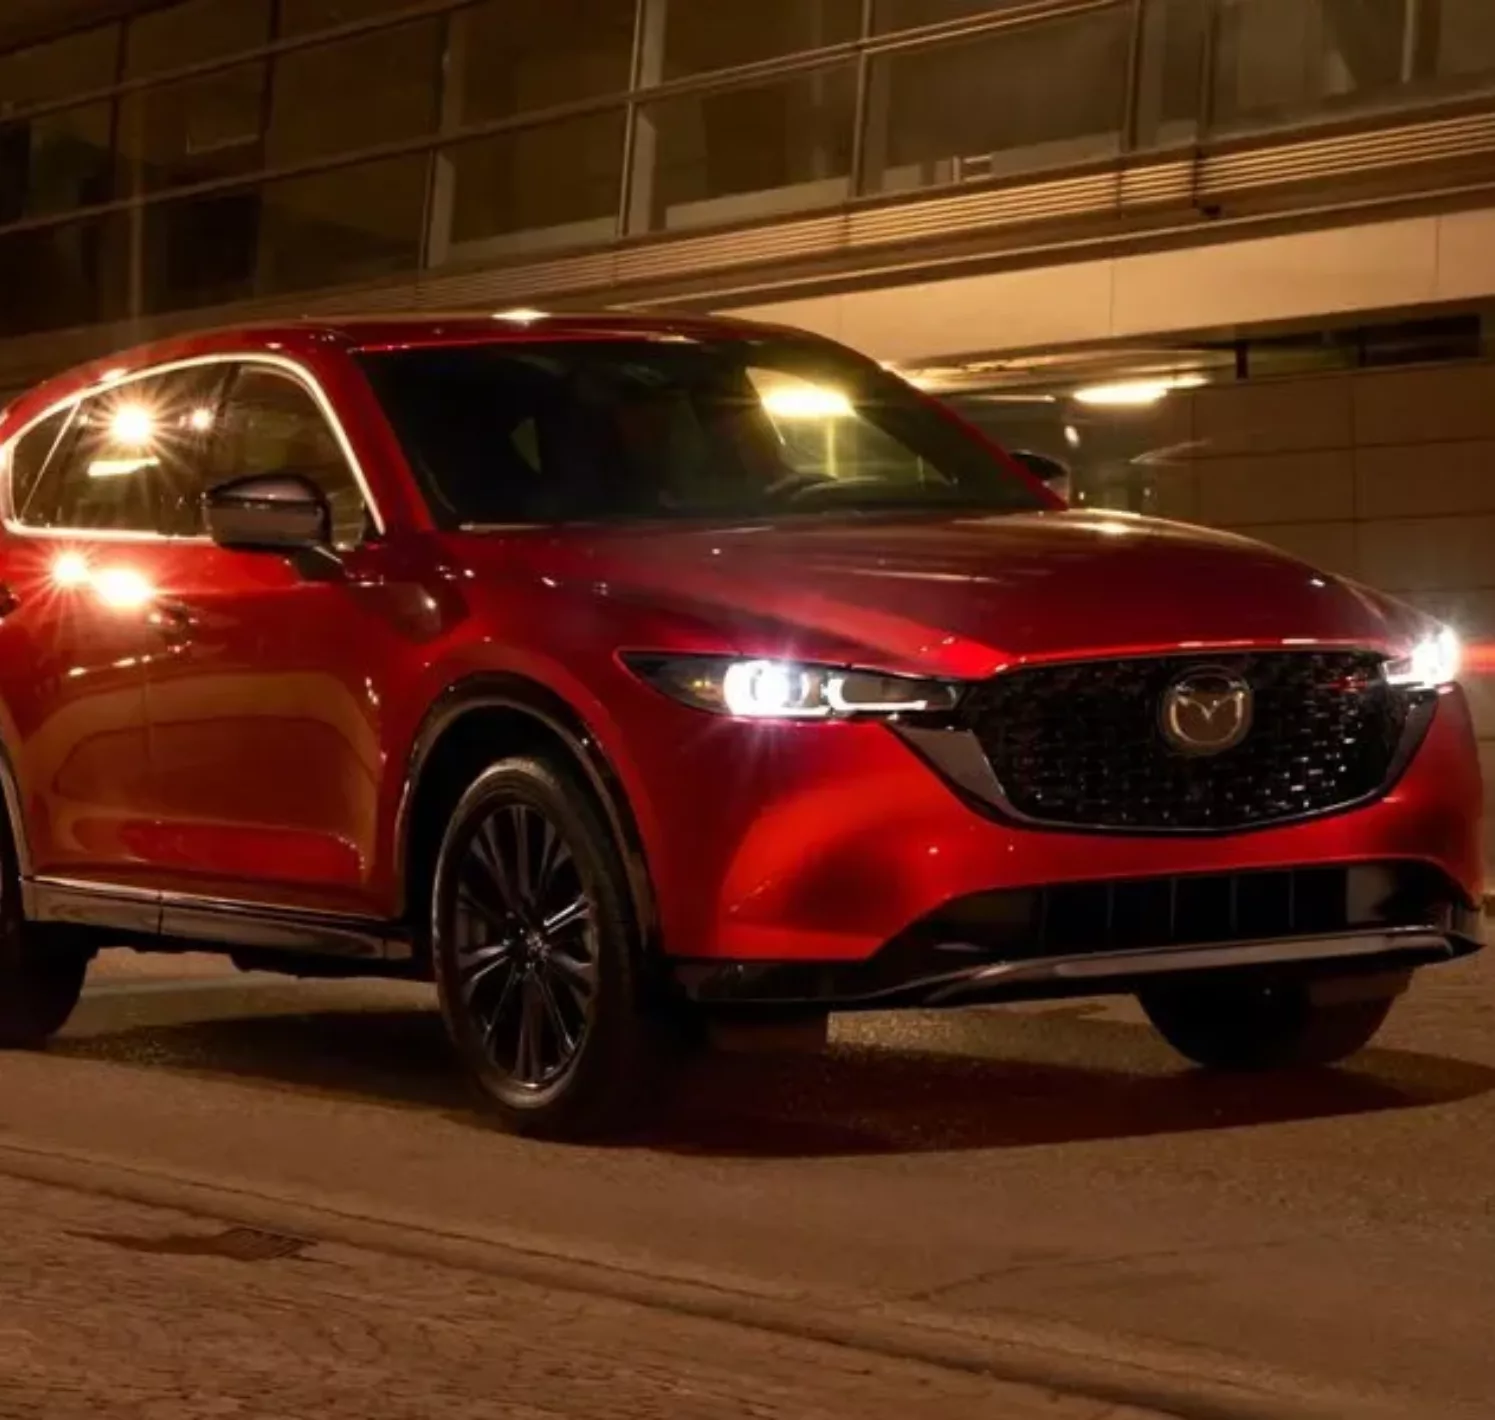 https://autofilter.sk/assets/images/cx-5/gallery/2022-mazda-cx-5-front-three-quarters-red-1631288272.webp - obrazok